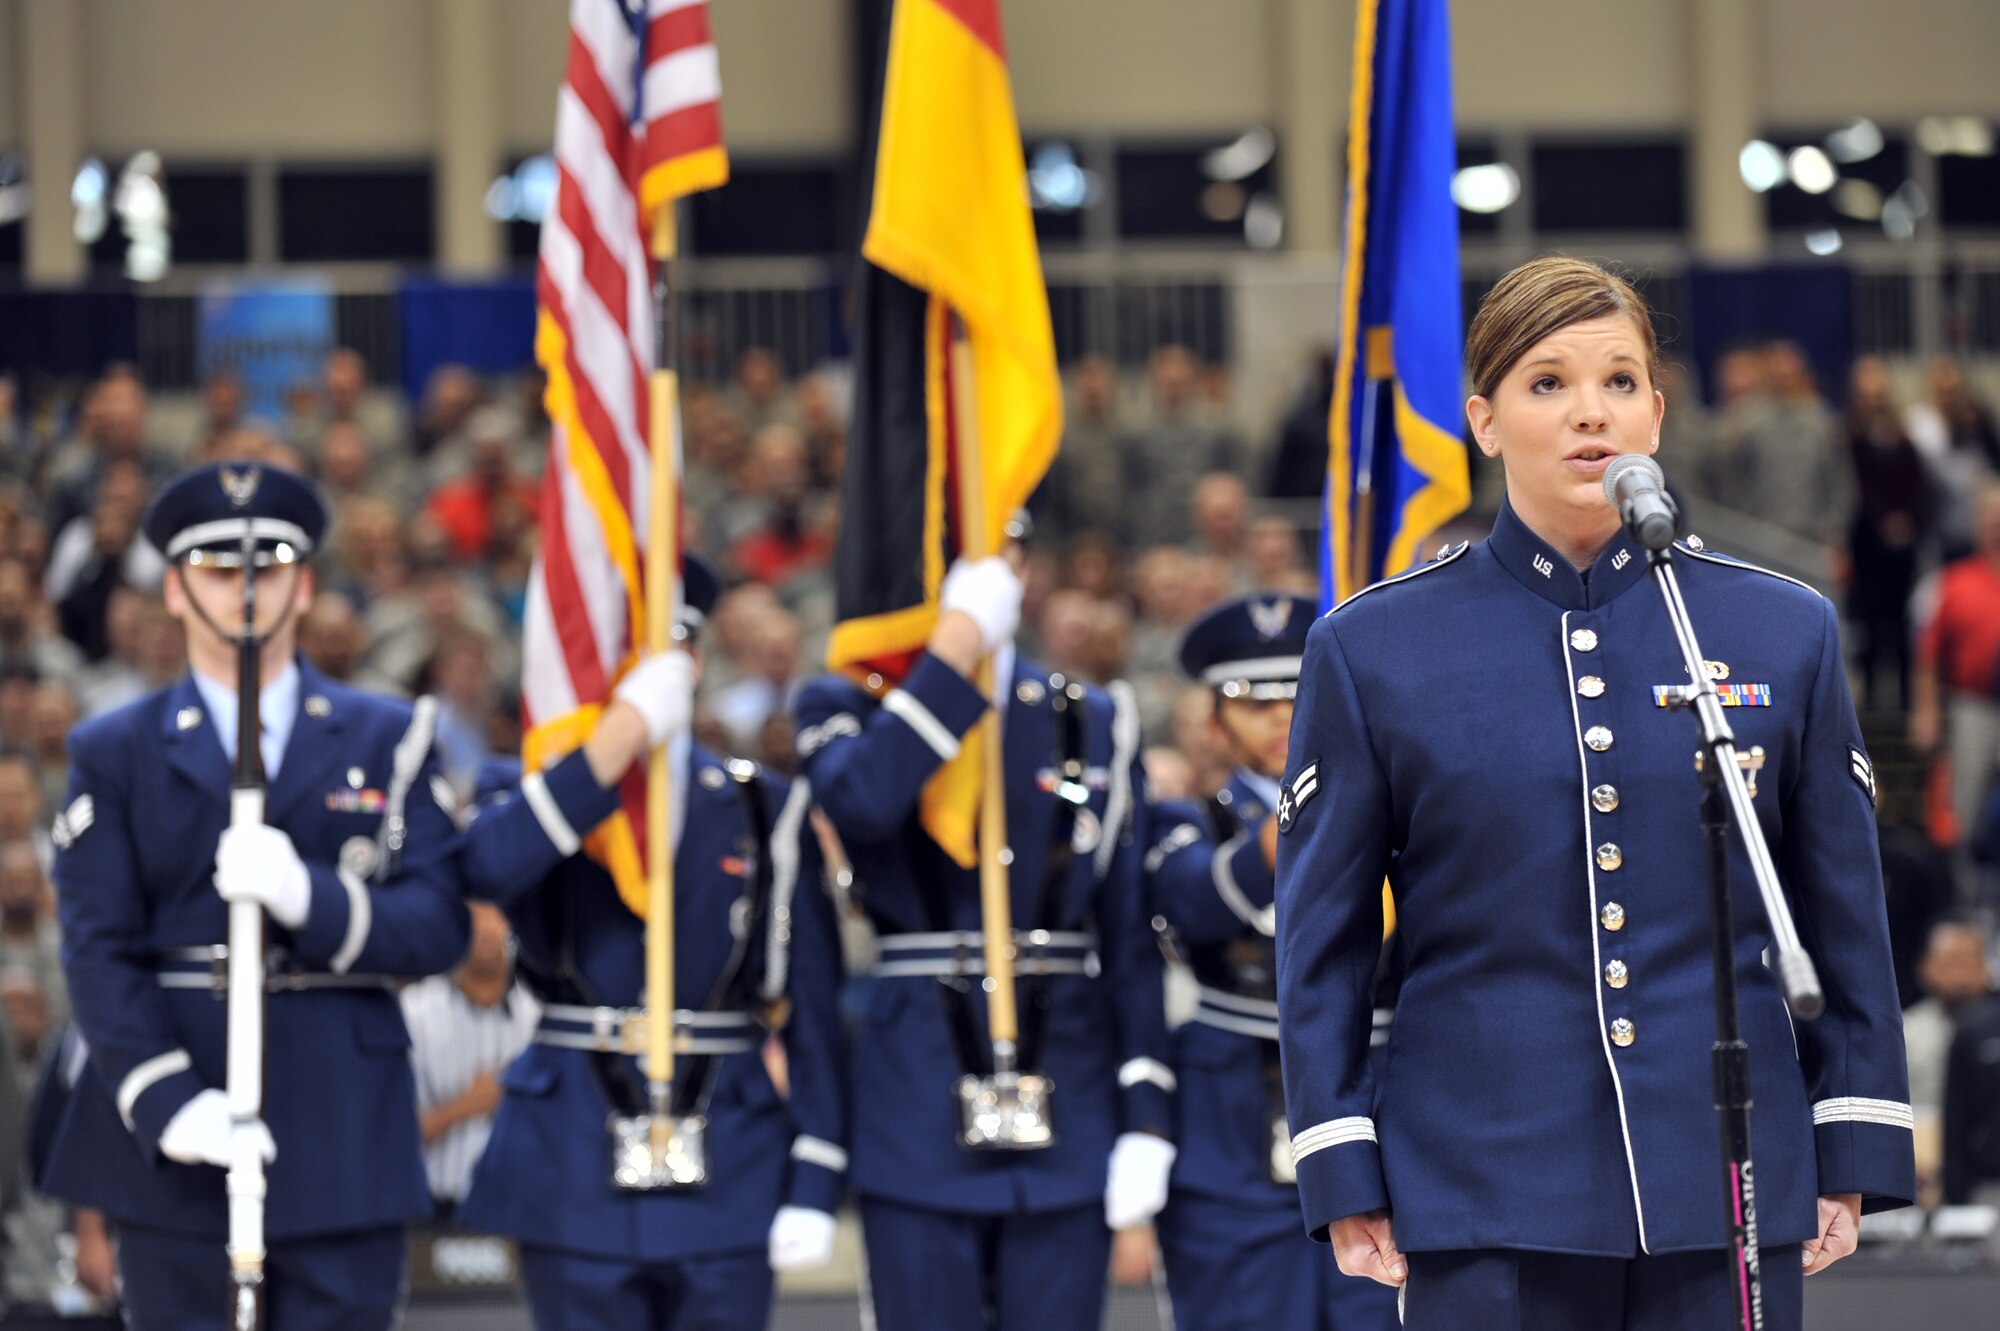 Airman 1st Class Melissa Rager, U.S. Air Forces in Europe band member, sings the German and American National Anthems at the 2012 Armed Forces Classic on Ramstein Air Base, Germany, Nov. 10, 2012. The match-up between Michigan State and University of Connecticut is part of ESPN's Veteran's week initiative to honor the men and women who have served and are still serving in the U.S. military. (U.S. Air Force photo/Senior Airman Caitlin O’Neil-McKeown)